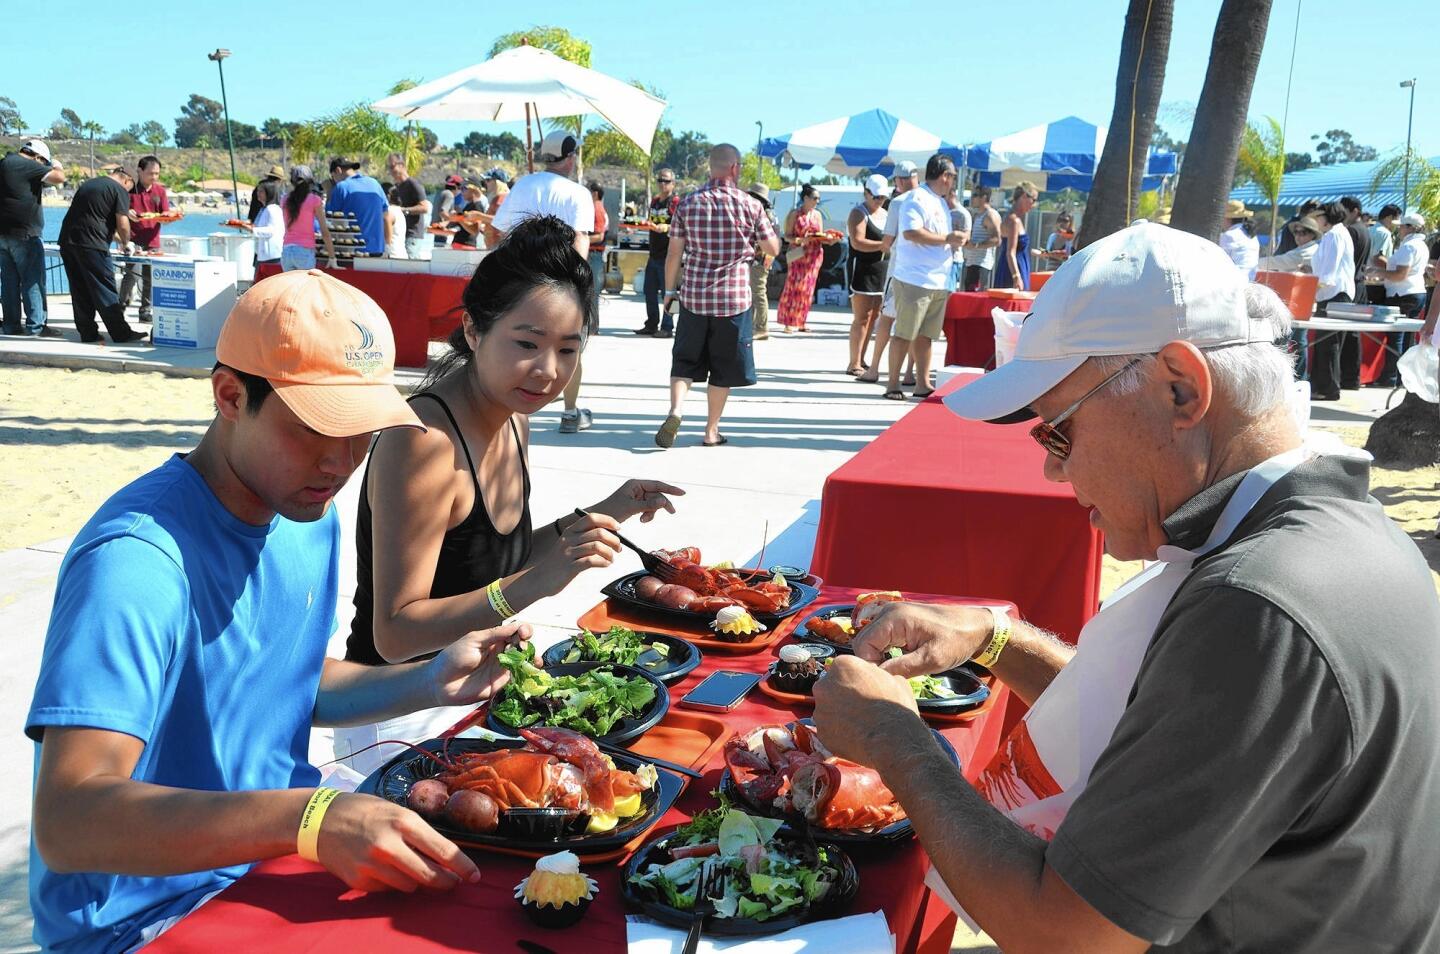 The Kawaguchi family enjoyed their lobster dinner during the seventh annual Lobsterfest held at Newport Dunes on Saturday.